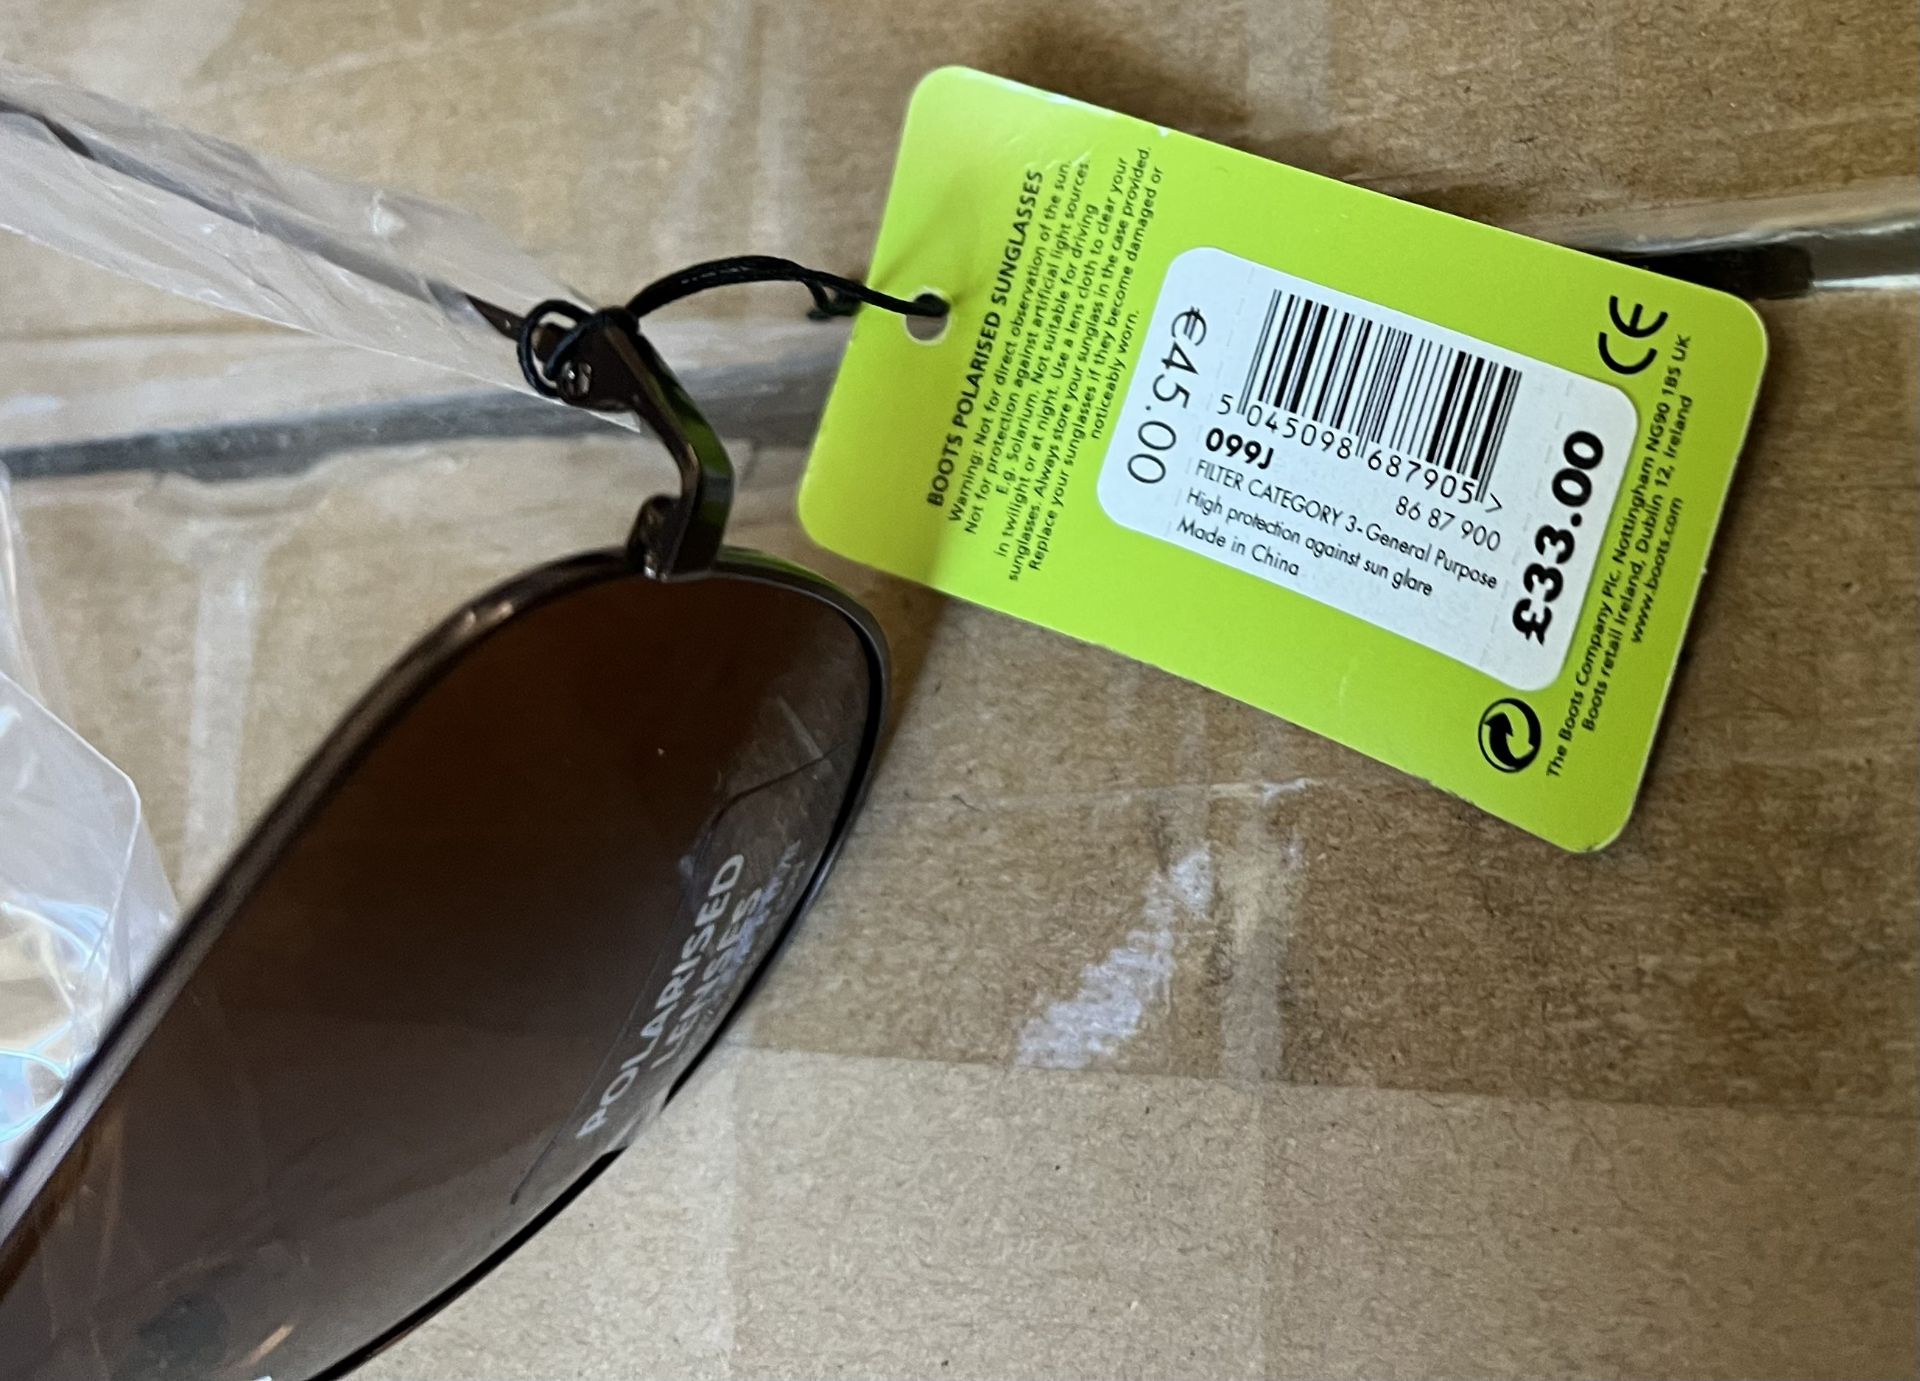 20 x Boots Polarised Lens Pilot Style Sunglasses 100% UVA - (NEW) - BOOTS RRP Â£660 ! - Image 7 of 7